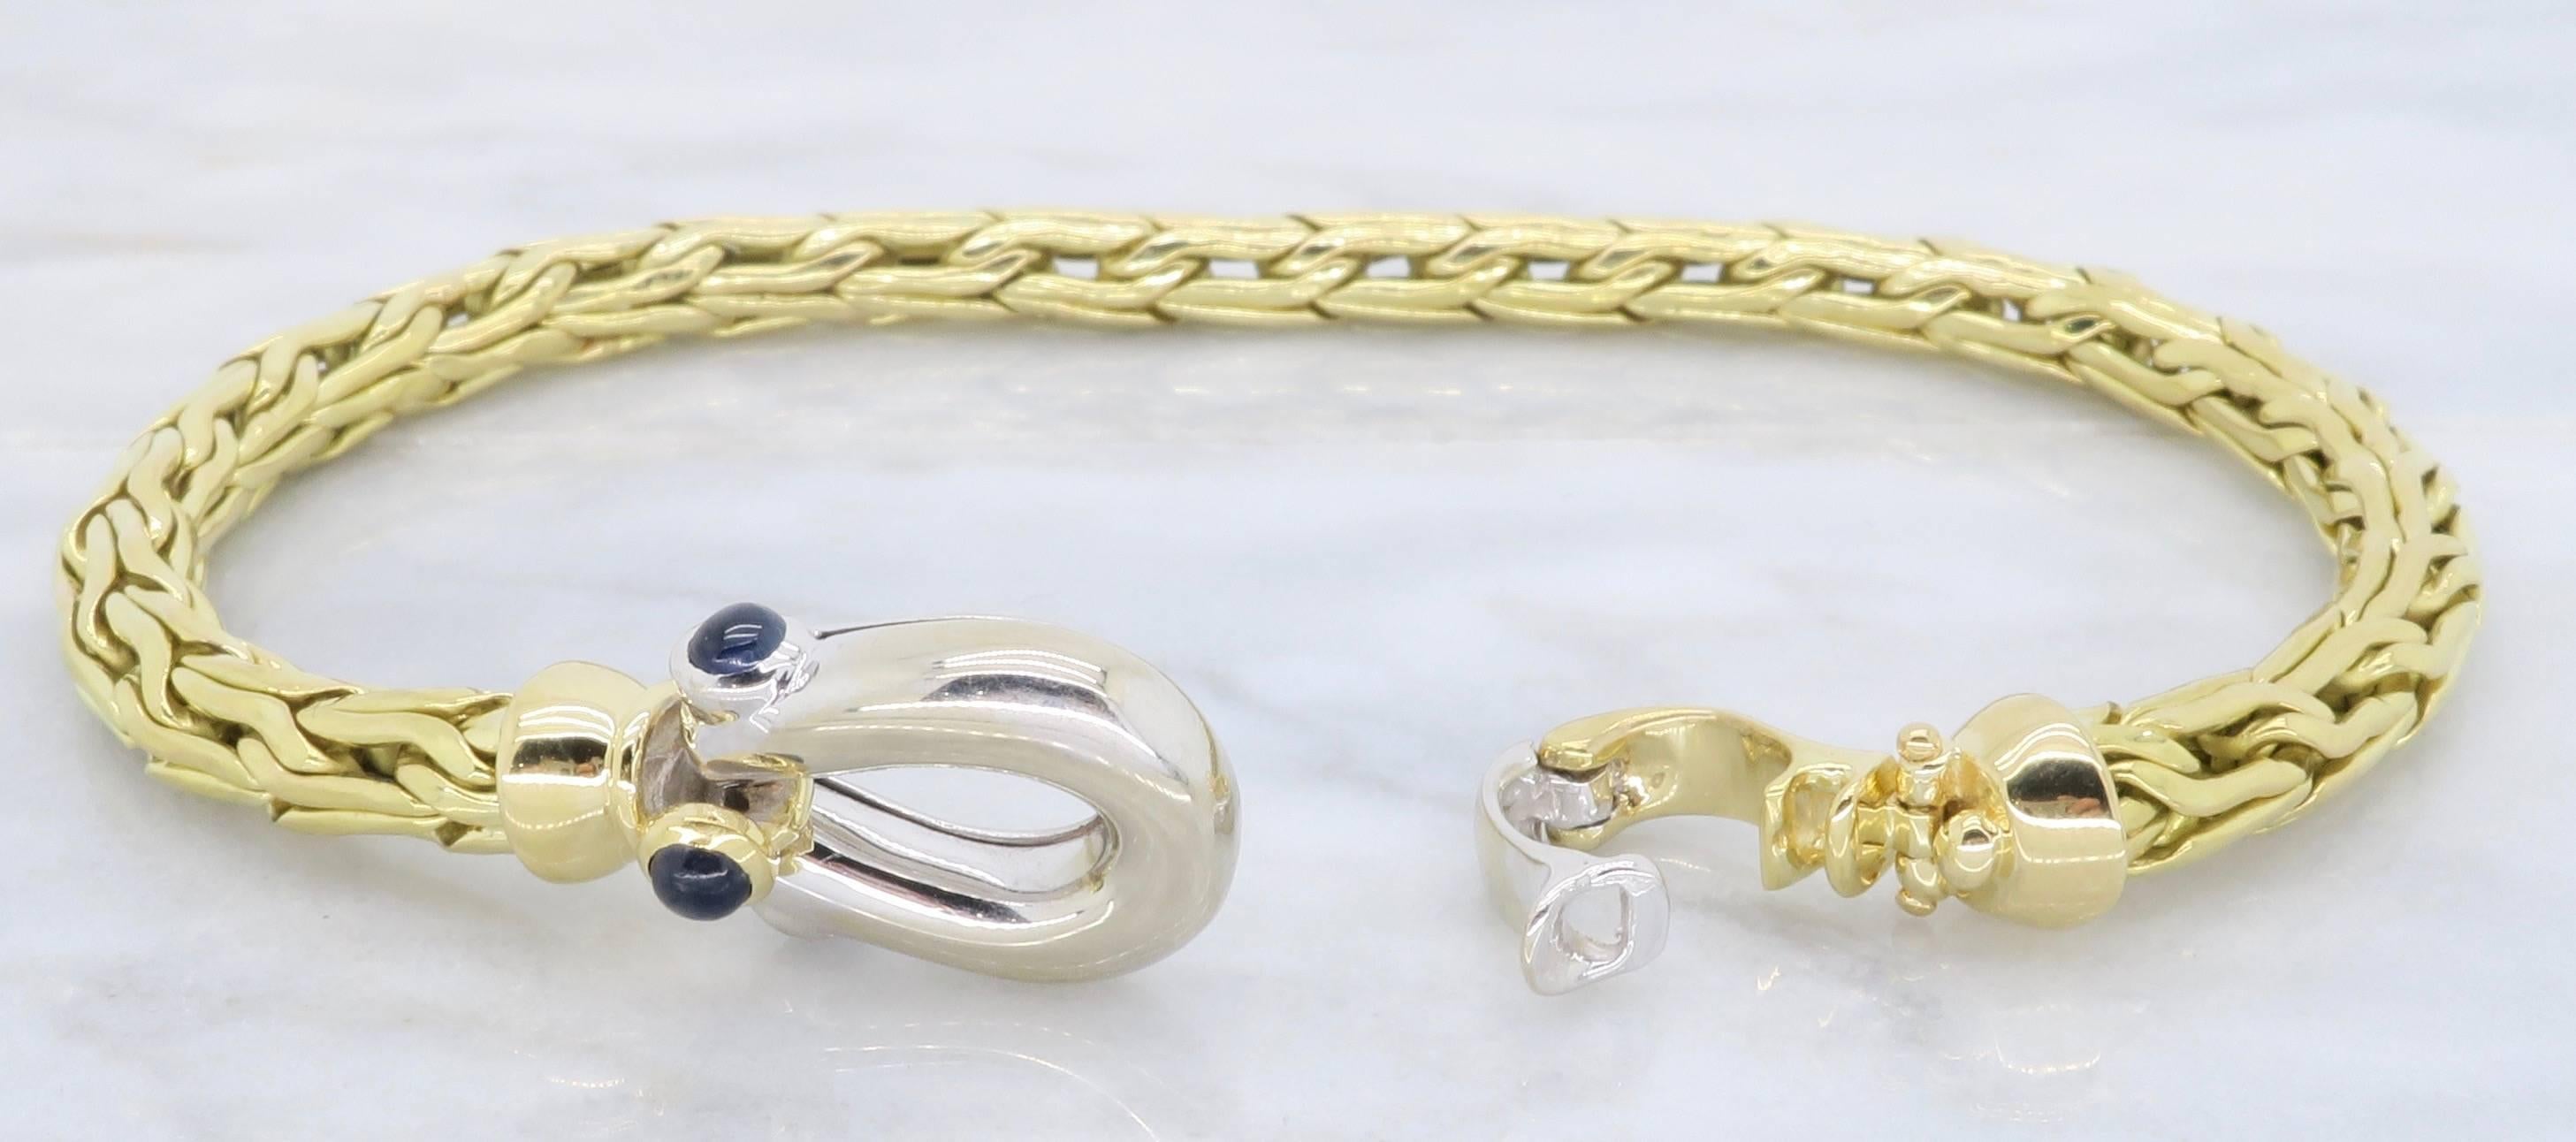 Beautiful Roberto Coin 18K Yellow Gold woven link bracelet, with a 18K White gold clasp. On the unique clasp of this designer bracelet are three round Blue Sapphires. The bracelet weighs 15.1 grams and is 6.5inches in length. The style number of